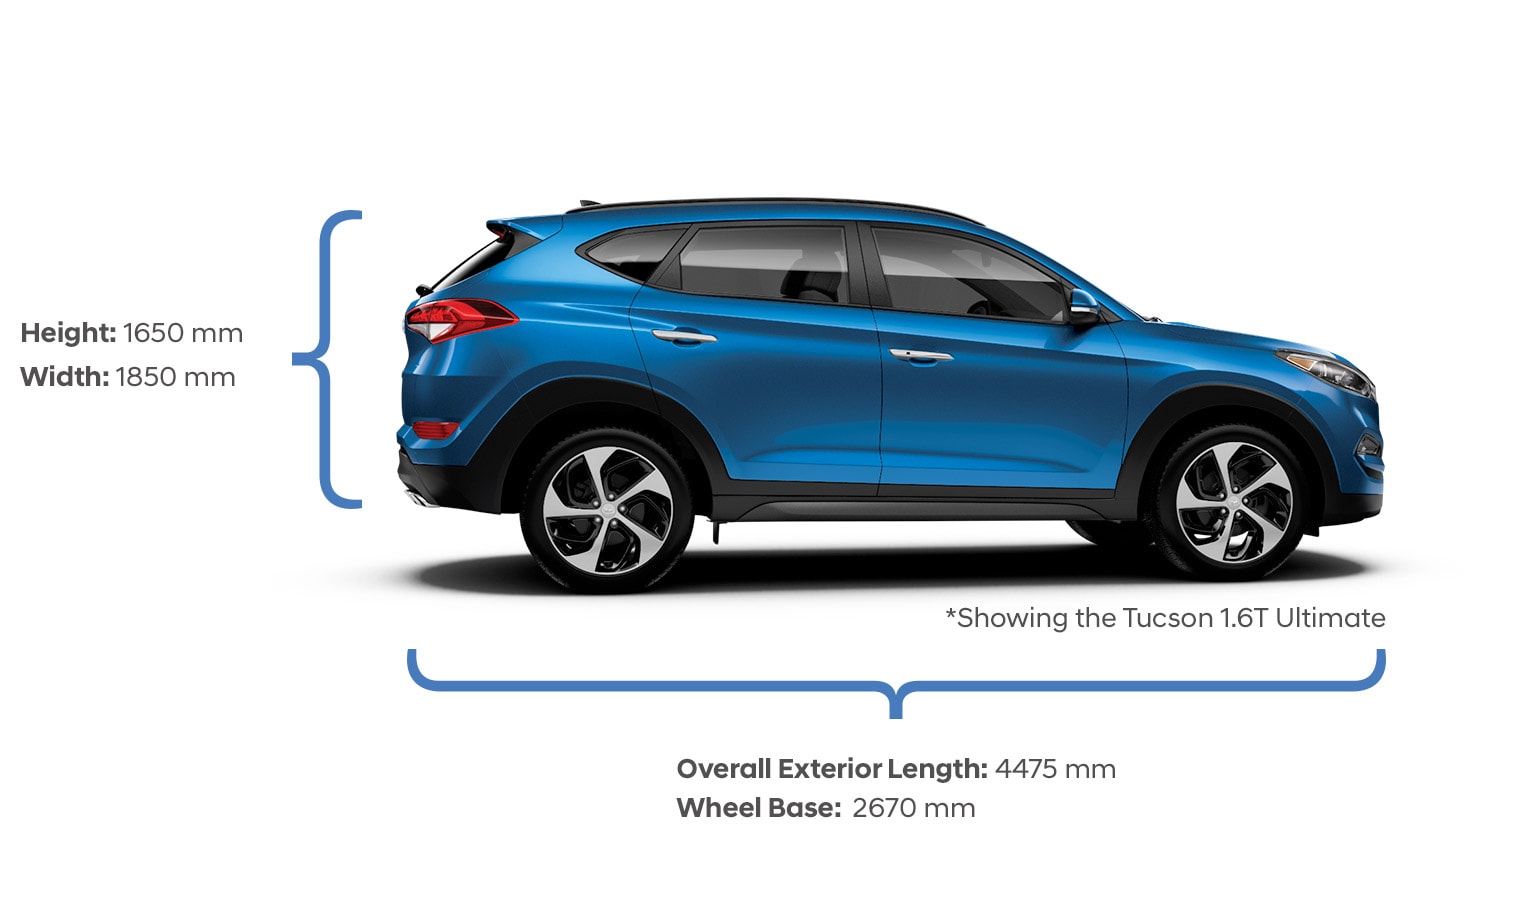 Height and Width Specifications of the Hyundai 2017 Tucson